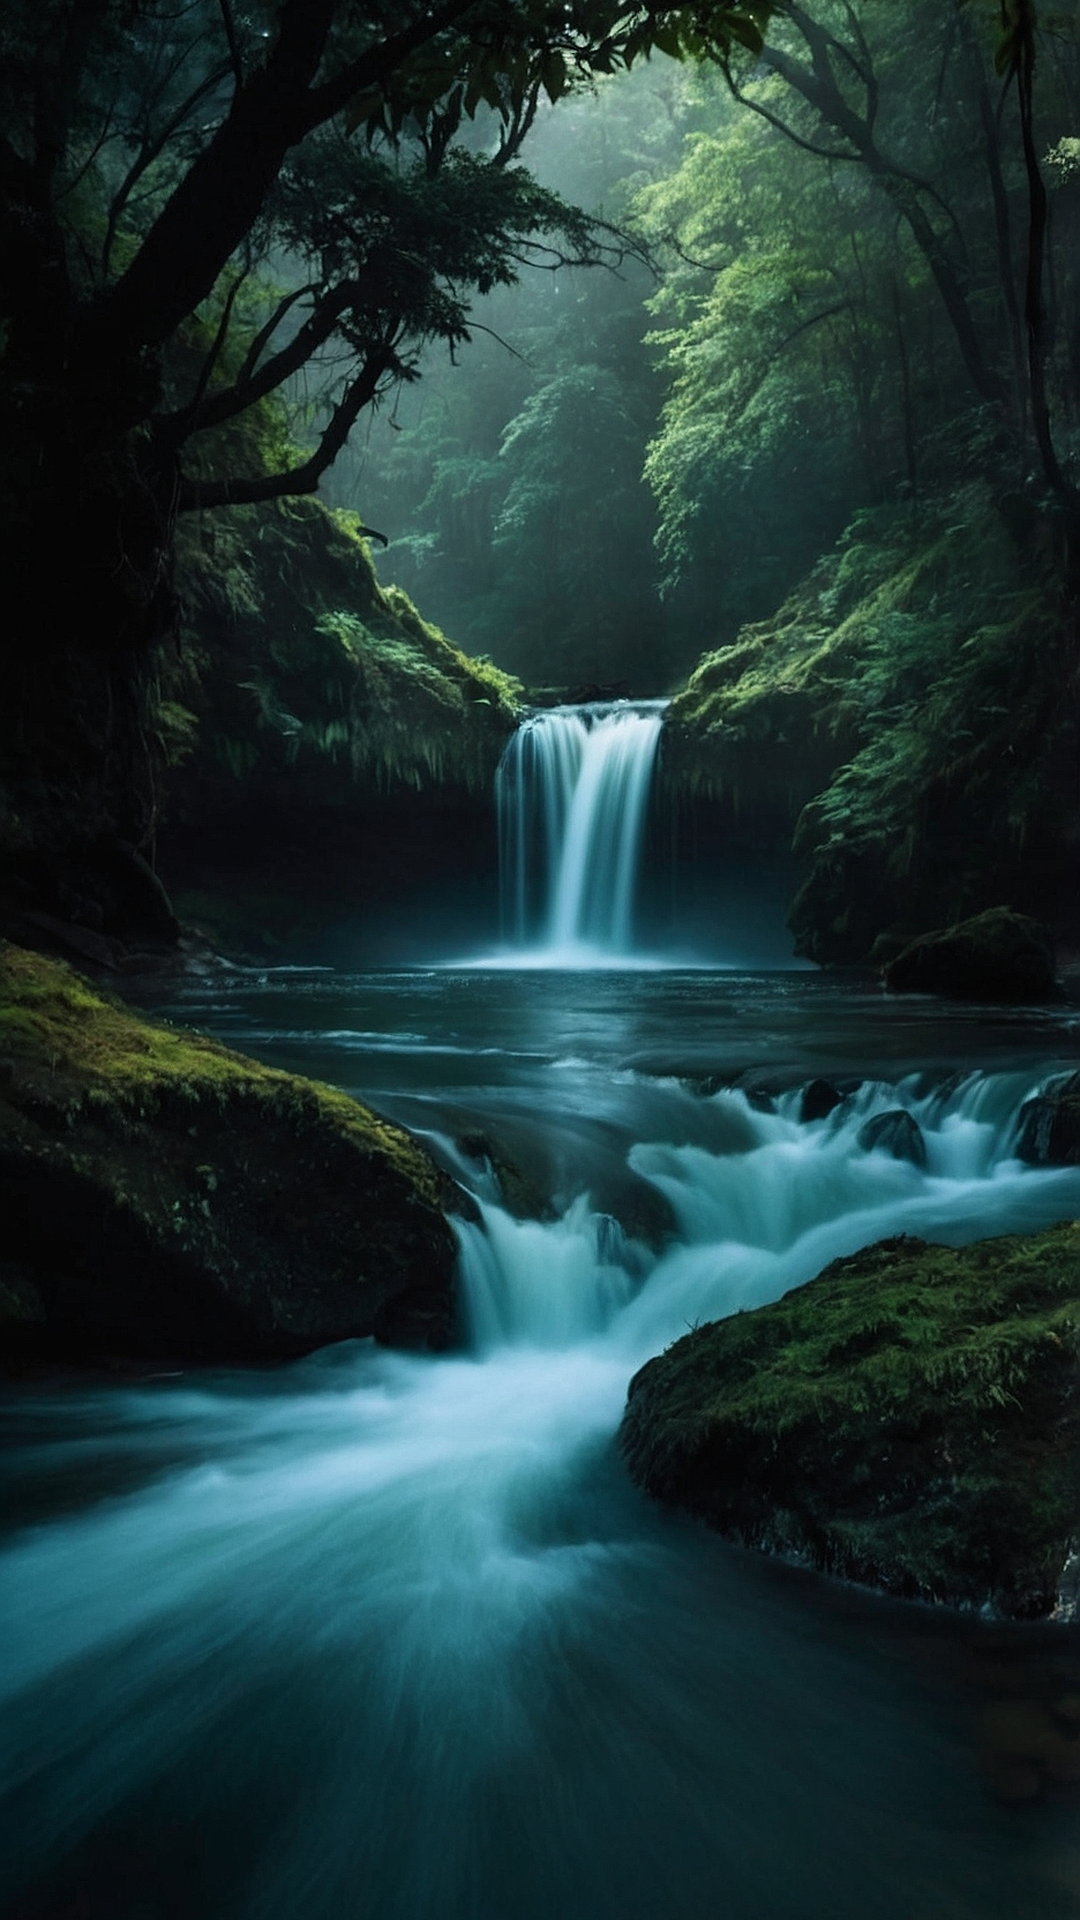 Whispering Waters: Serene Waterfall Wallpaper Choices